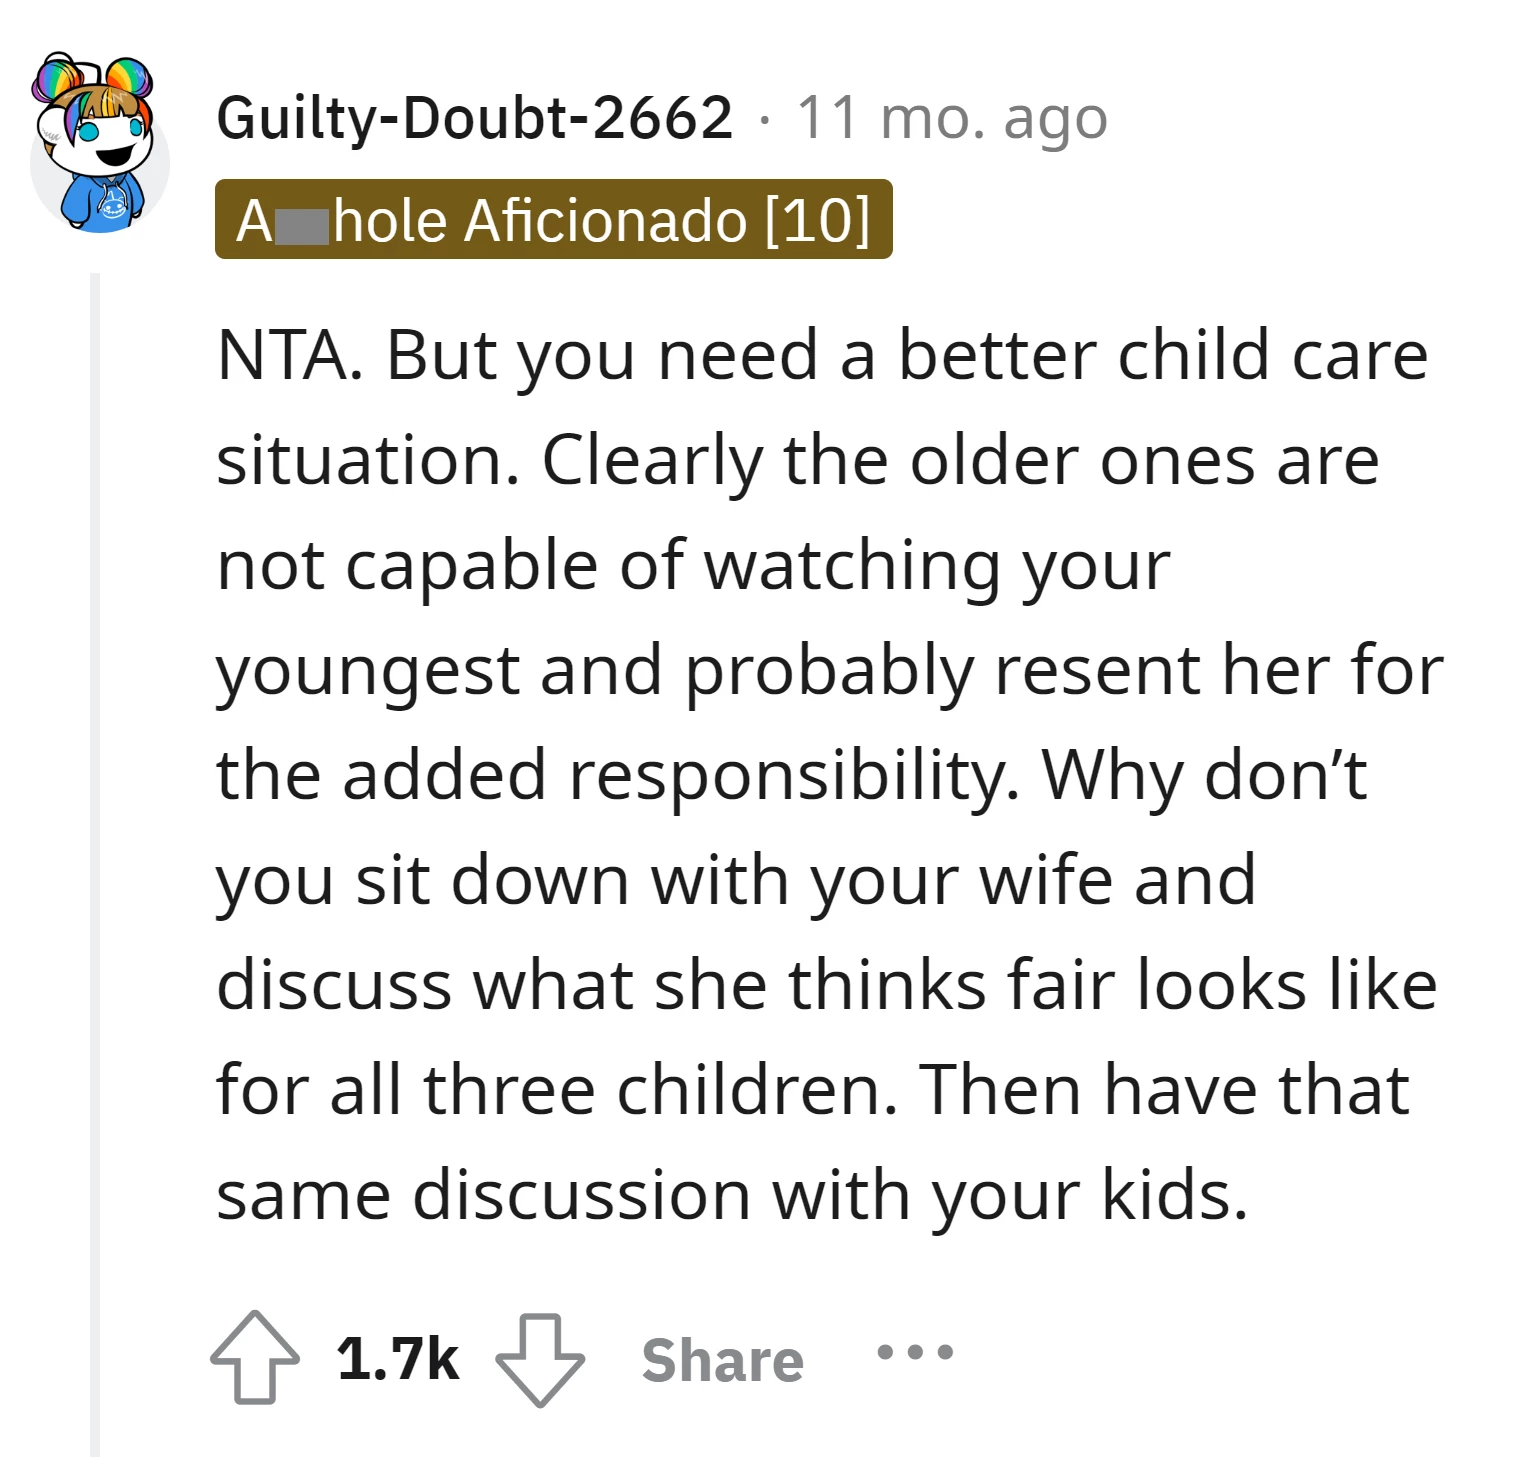 OP needs a discussion with both the wife and kids to determine a fair solution for all three children